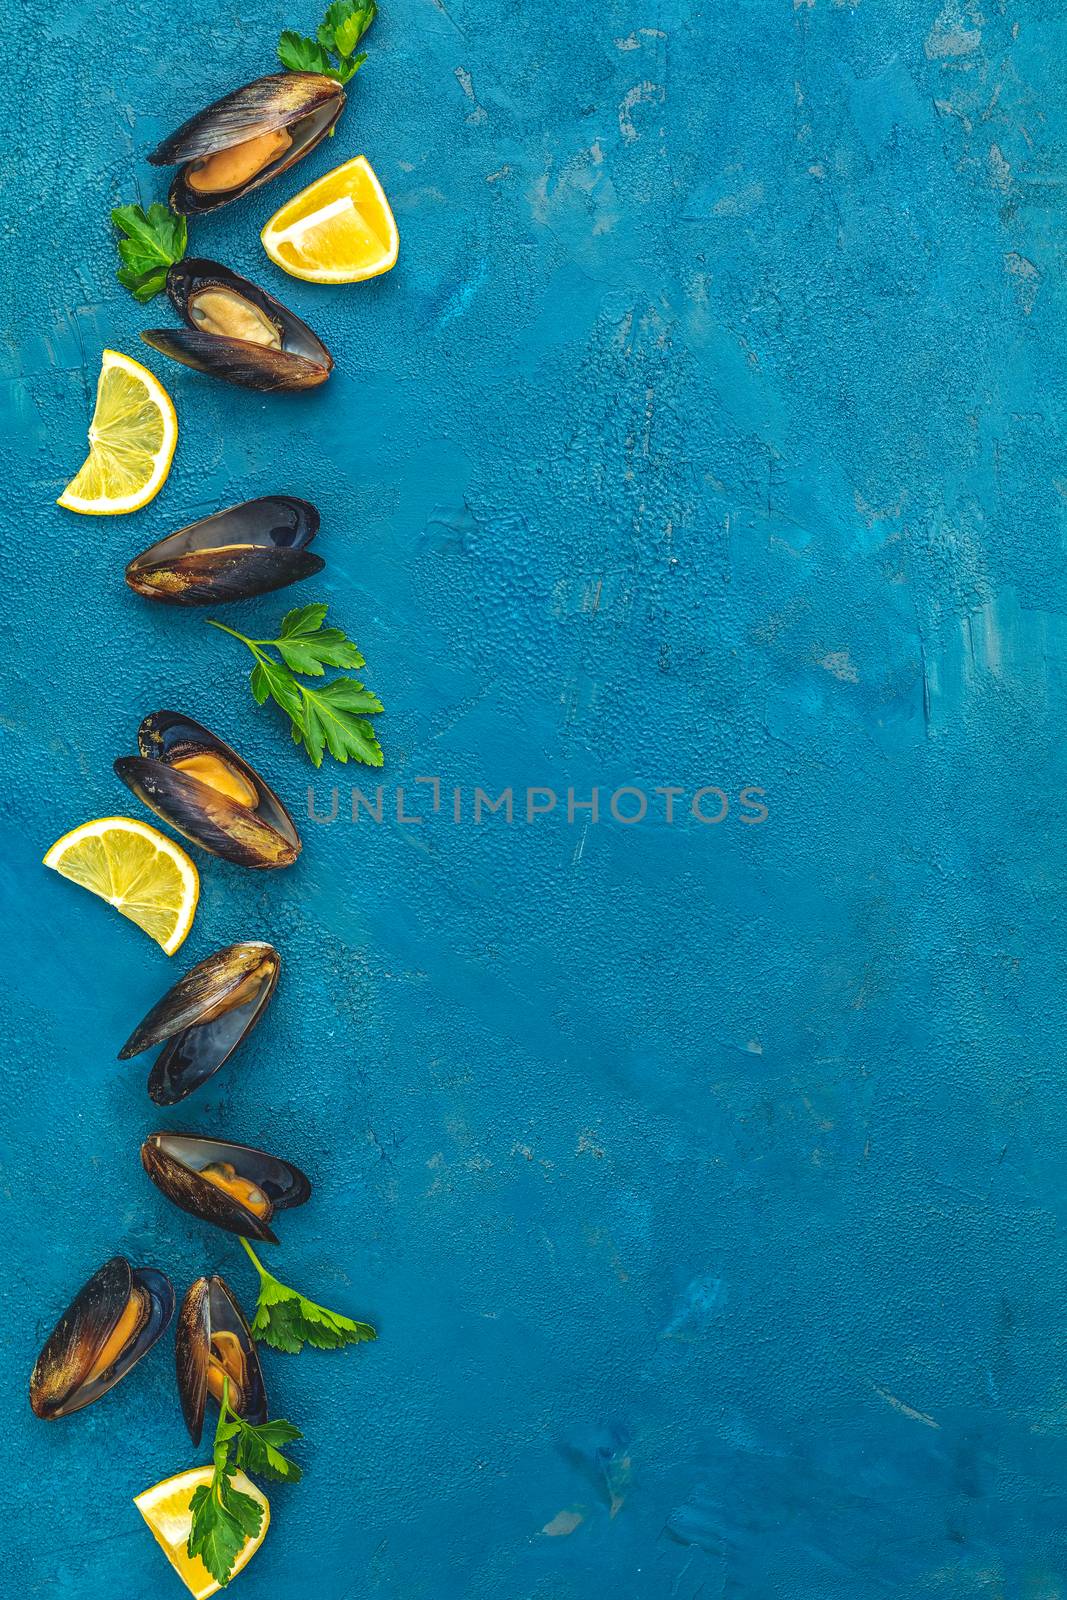 Seafood mussels with lemon and parsley by ArtSvitlyna